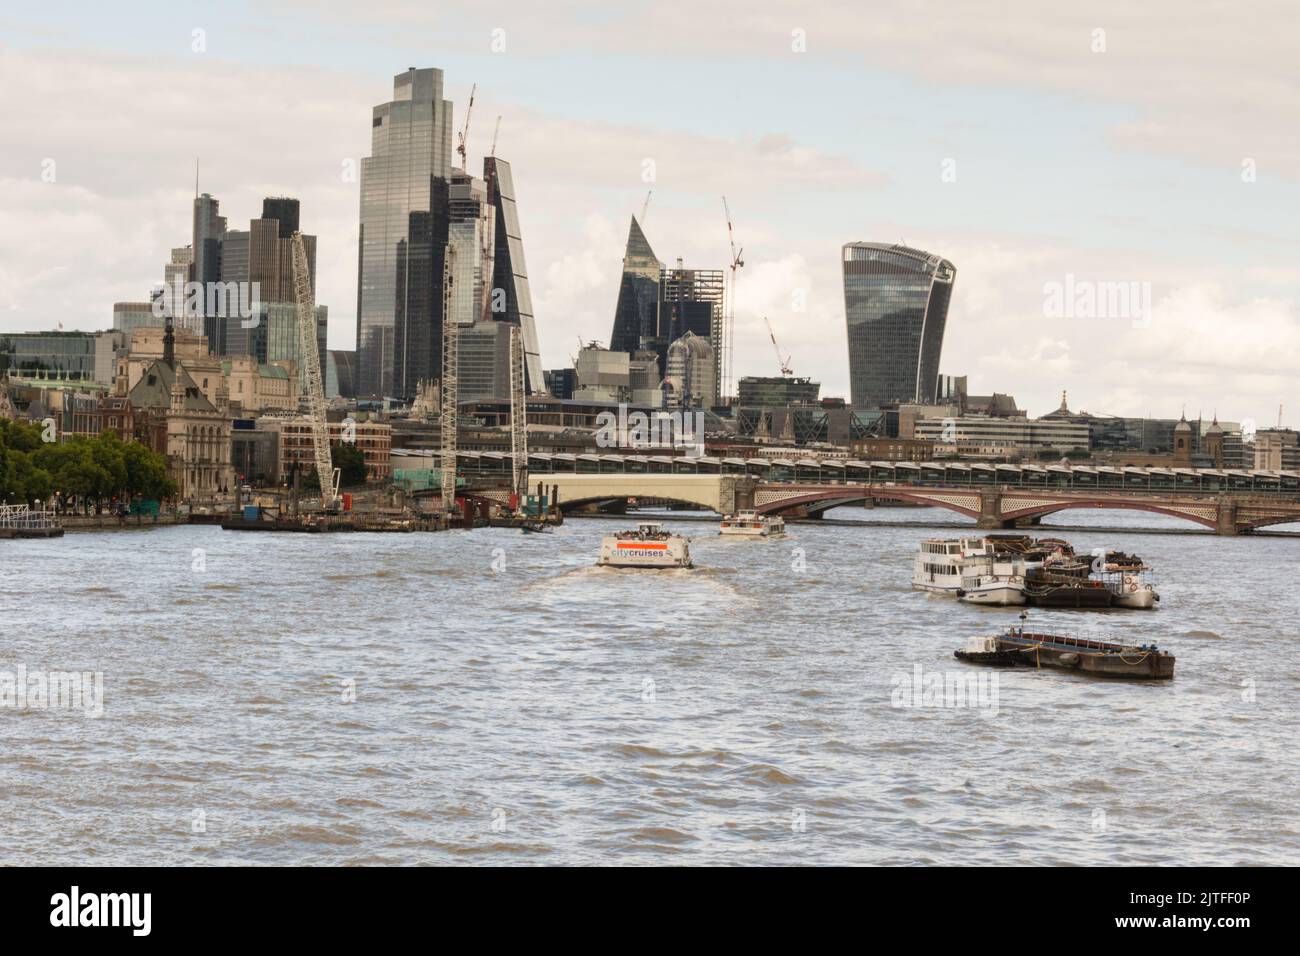 A view of the River Thames and the skyscrapers of the City of London skyline from Waterloo Bridge, London, England, UK Stock Photo